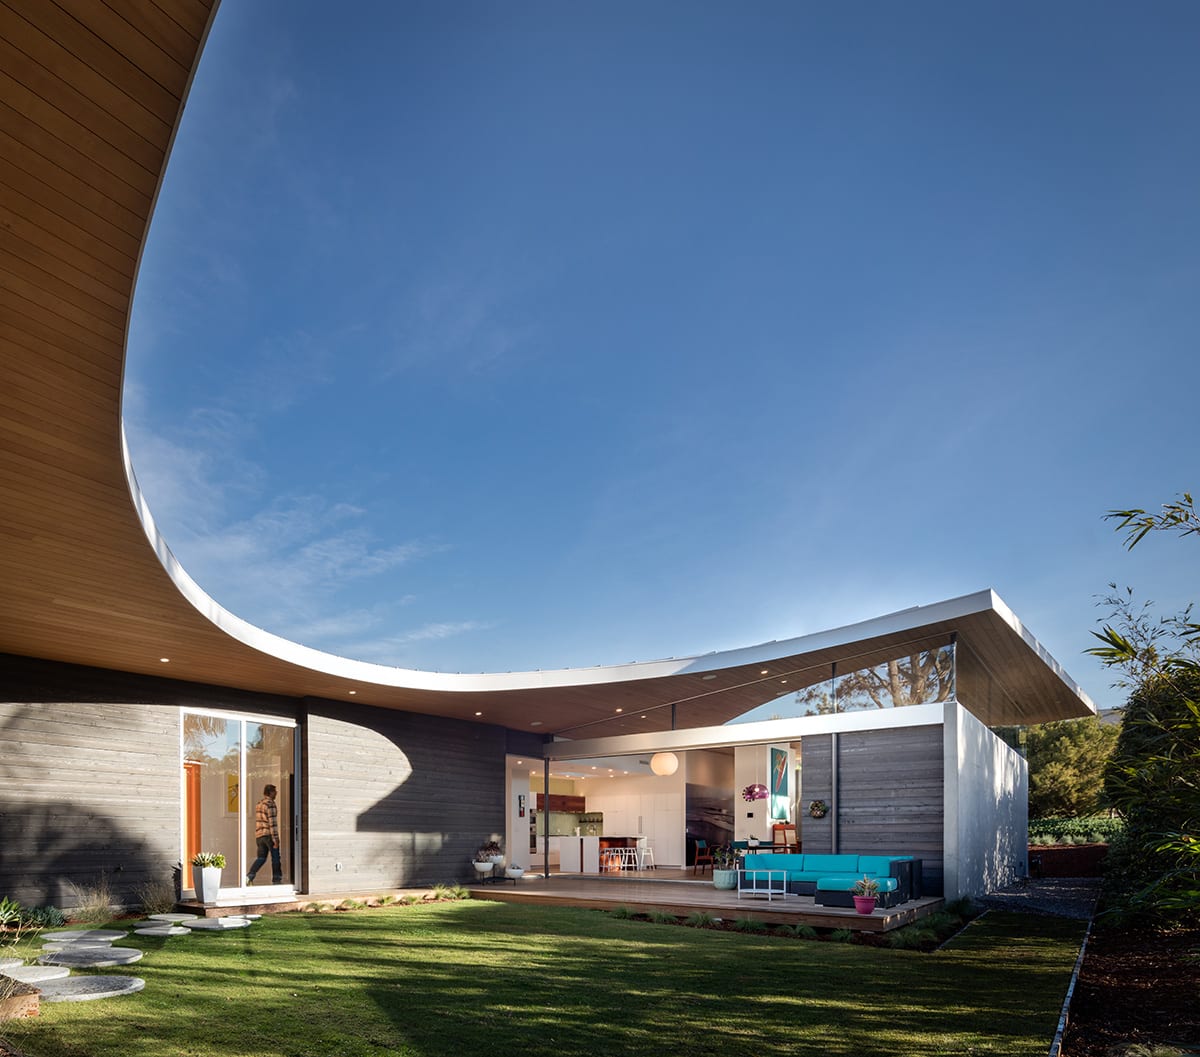 The home's wood-paneled curvilinear roof provides a unique profile as it leaves the grassy backyard uncovered.